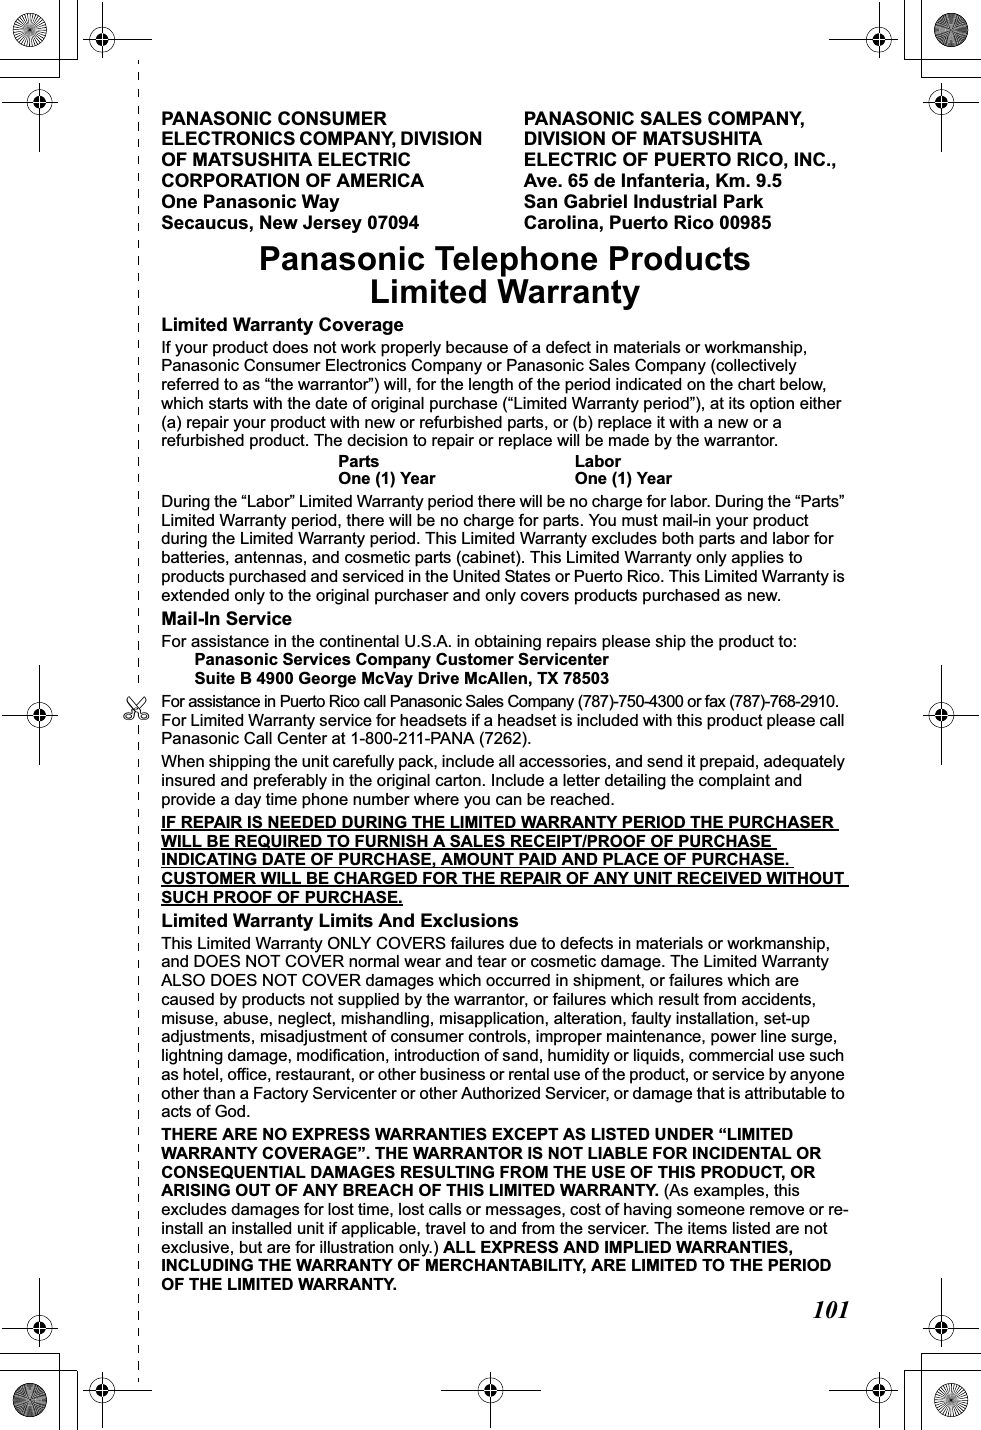 101✄PANASONIC CONSUMER ELECTRONICS COMPANY, DIVISION OF MATSUSHITA ELECTRIC CORPORATION OF AMERICA One Panasonic Way Secaucus, New Jersey 07094PANASONIC SALES COMPANY, DIVISION OF MATSUSHITA ELECTRIC OF PUERTO RICO, INC., Ave. 65 de Infanteria, Km. 9.5 San Gabriel Industrial Park Carolina, Puerto Rico 00985 Panasonic Telephone ProductsLimited WarrantyLimited Warranty CoverageIf your product does not work properly because of a defect in materials or workmanship, Panasonic Consumer Electronics Company or Panasonic Sales Company (collectively referred to as “the warrantor”) will, for the length of the period indicated on the chart below, which starts with the date of original purchase (“Limited Warranty period”), at its option either (a) repair your product with new or refurbished parts, or (b) replace it with a new or a refurbished product. The decision to repair or replace will be made by the warrantor.Parts LaborOne (1) Year One (1) YearDuring the “Labor” Limited Warranty period there will be no charge for labor. During the “Parts” Limited Warranty period, there will be no charge for parts. You must mail-in your product during the Limited Warranty period. This Limited Warranty excludes both parts and labor for batteries, antennas, and cosmetic parts (cabinet). This Limited Warranty only applies to products purchased and serviced in the United States or Puerto Rico. This Limited Warranty is extended only to the original purchaser and only covers products purchased as new.Mail-In ServiceFor assistance in the continental U.S.A. in obtaining repairs please ship the product to:Panasonic Services Company Customer ServicenterSuite B 4900 George McVay Drive McAllen, TX 78503For assistance in Puerto Rico call Panasonic Sales Company (787)-750-4300 or fax (787)-768-2910.For Limited Warranty service for headsets if a headset is included with this product please call Panasonic Call Center at 1-800-211-PANA (7262).When shipping the unit carefully pack, include all accessories, and send it prepaid, adequately insured and preferably in the original carton. Include a letter detailing the complaint and provide a day time phone number where you can be reached.IF REPAIR IS NEEDED DURING THE LIMITED WARRANTY PERIOD THE PURCHASER WILL BE REQUIRED TO FURNISH A SALES RECEIPT/PROOF OF PURCHASE INDICATING DATE OF PURCHASE, AMOUNT PAID AND PLACE OF PURCHASE. CUSTOMER WILL BE CHARGED FOR THE REPAIR OF ANY UNIT RECEIVED WITHOUT SUCH PROOF OF PURCHASE.Limited Warranty Limits And ExclusionsThis Limited Warranty ONLY COVERS failures due to defects in materials or workmanship, and DOES NOT COVER normal wear and tear or cosmetic damage. The Limited Warranty ALSO DOES NOT COVER damages which occurred in shipment, or failures which are caused by products not supplied by the warrantor, or failures which result from accidents, misuse, abuse, neglect, mishandling, misapplication, alteration, faulty installation, set-up adjustments, misadjustment of consumer controls, improper maintenance, power line surge, lightning damage, modification, introduction of sand, humidity or liquids, commercial use such as hotel, office, restaurant, or other business or rental use of the product, or service by anyone other than a Factory Servicenter or other Authorized Servicer, or damage that is attributable to acts of God.THERE ARE NO EXPRESS WARRANTIES EXCEPT AS LISTED UNDER “LIMITED WARRANTY COVERAGE”. THE WARRANTOR IS NOT LIABLE FOR INCIDENTAL OR CONSEQUENTIAL DAMAGES RESULTING FROM THE USE OF THIS PRODUCT, OR ARISING OUT OF ANY BREACH OF THIS LIMITED WARRANTY. (As examples, this excludes damages for lost time, lost calls or messages, cost of having someone remove or re-install an installed unit if applicable, travel to and from the servicer. The items listed are not exclusive, but are for illustration only.) ALL EXPRESS AND IMPLIED WARRANTIES, INCLUDING THE WARRANTY OF MERCHANTABILITY, ARE LIMITED TO THE PERIOD OF THE LIMITED WARRANTY.